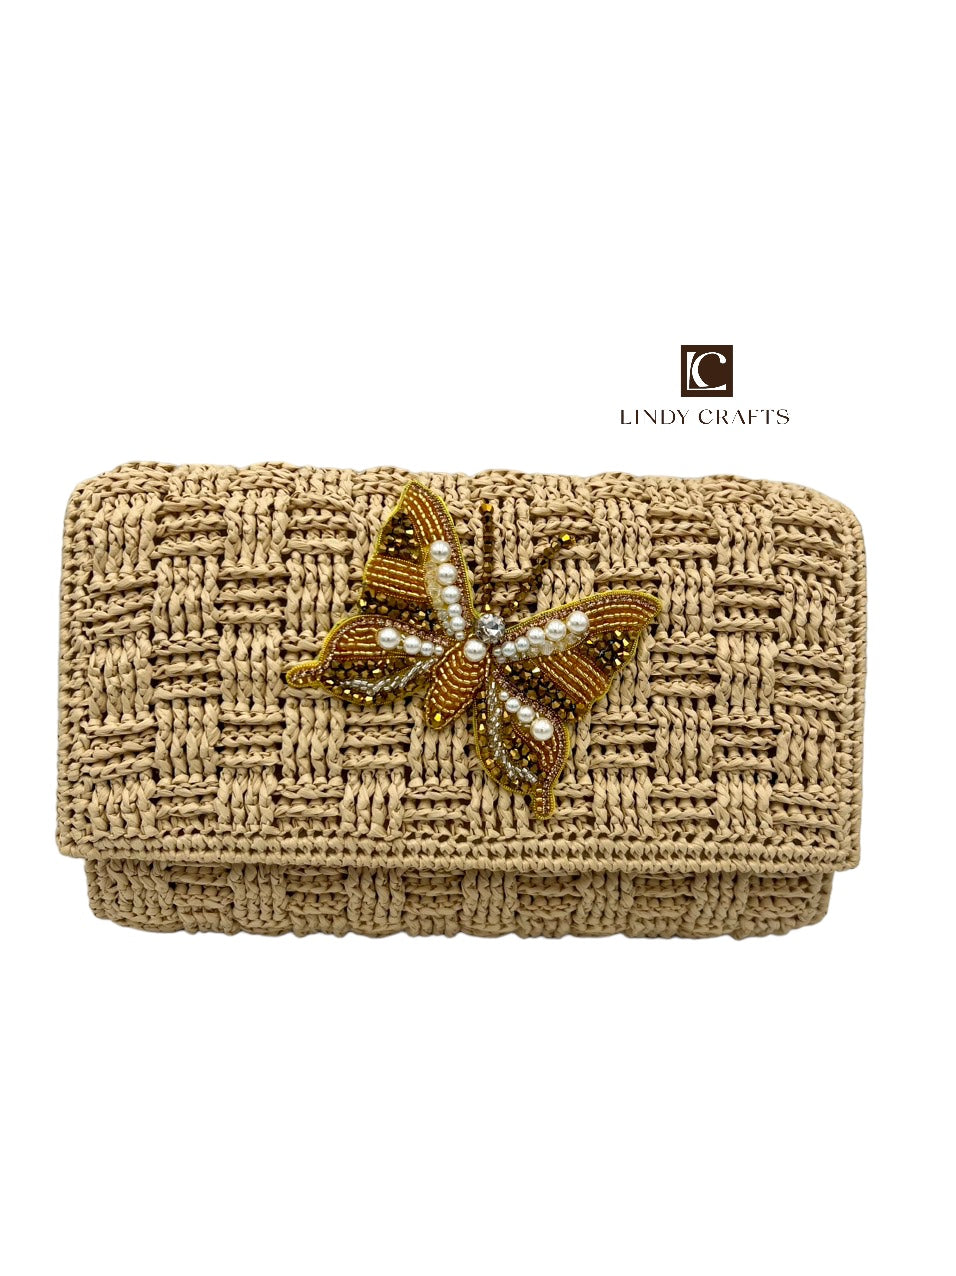 Golden Butterfly Clutch - Made to order